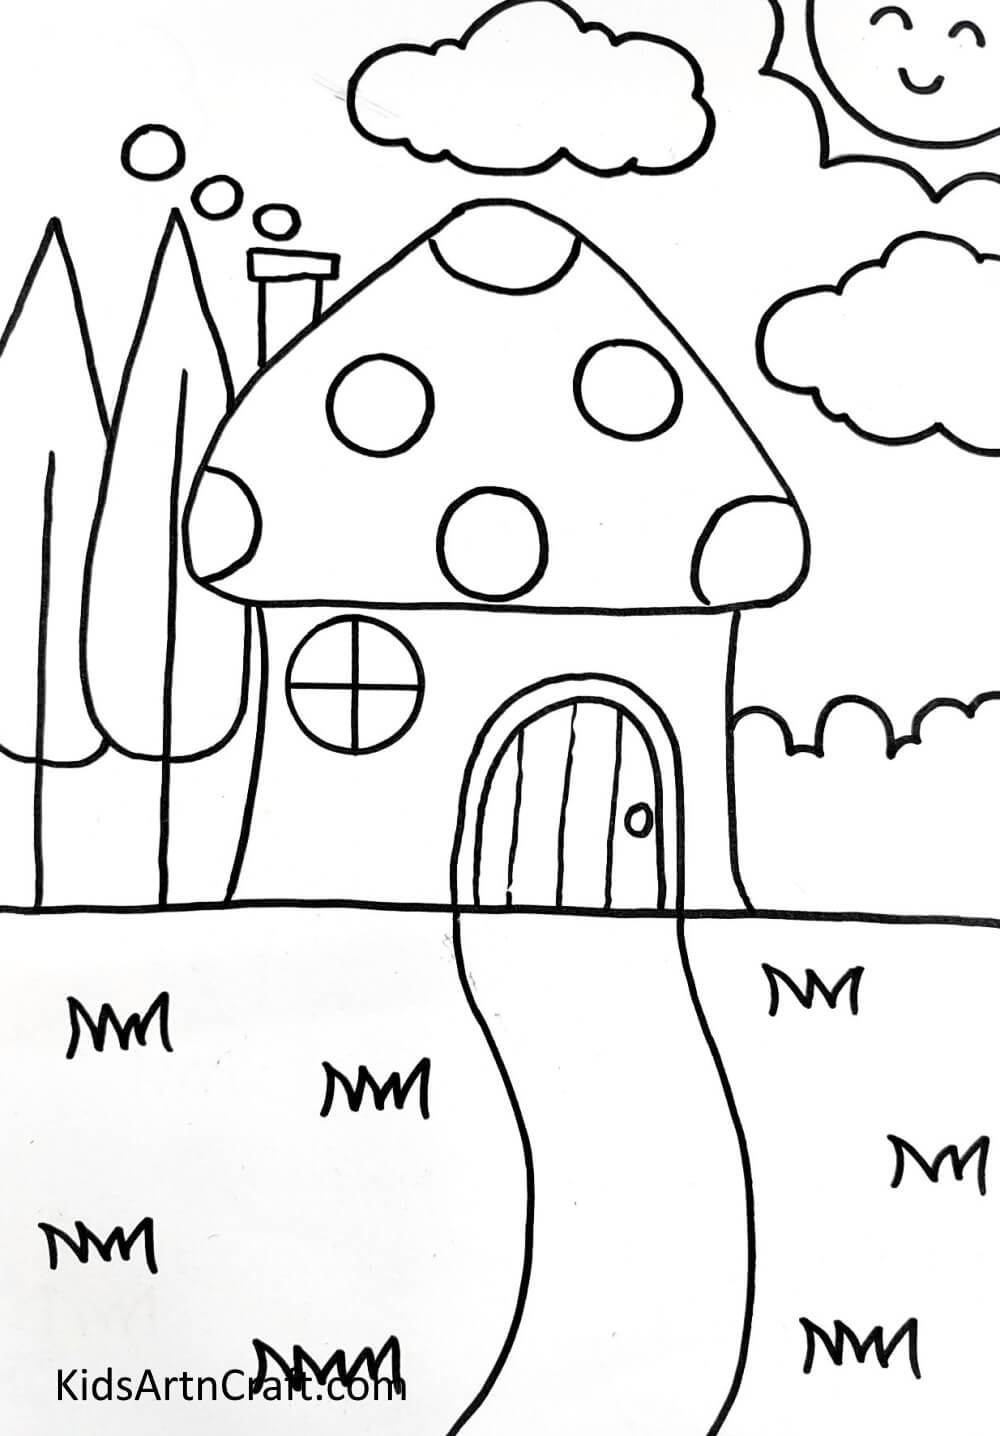 Drawing The Sky - How to Construct a Mushroom Dwelling Step-by-Step